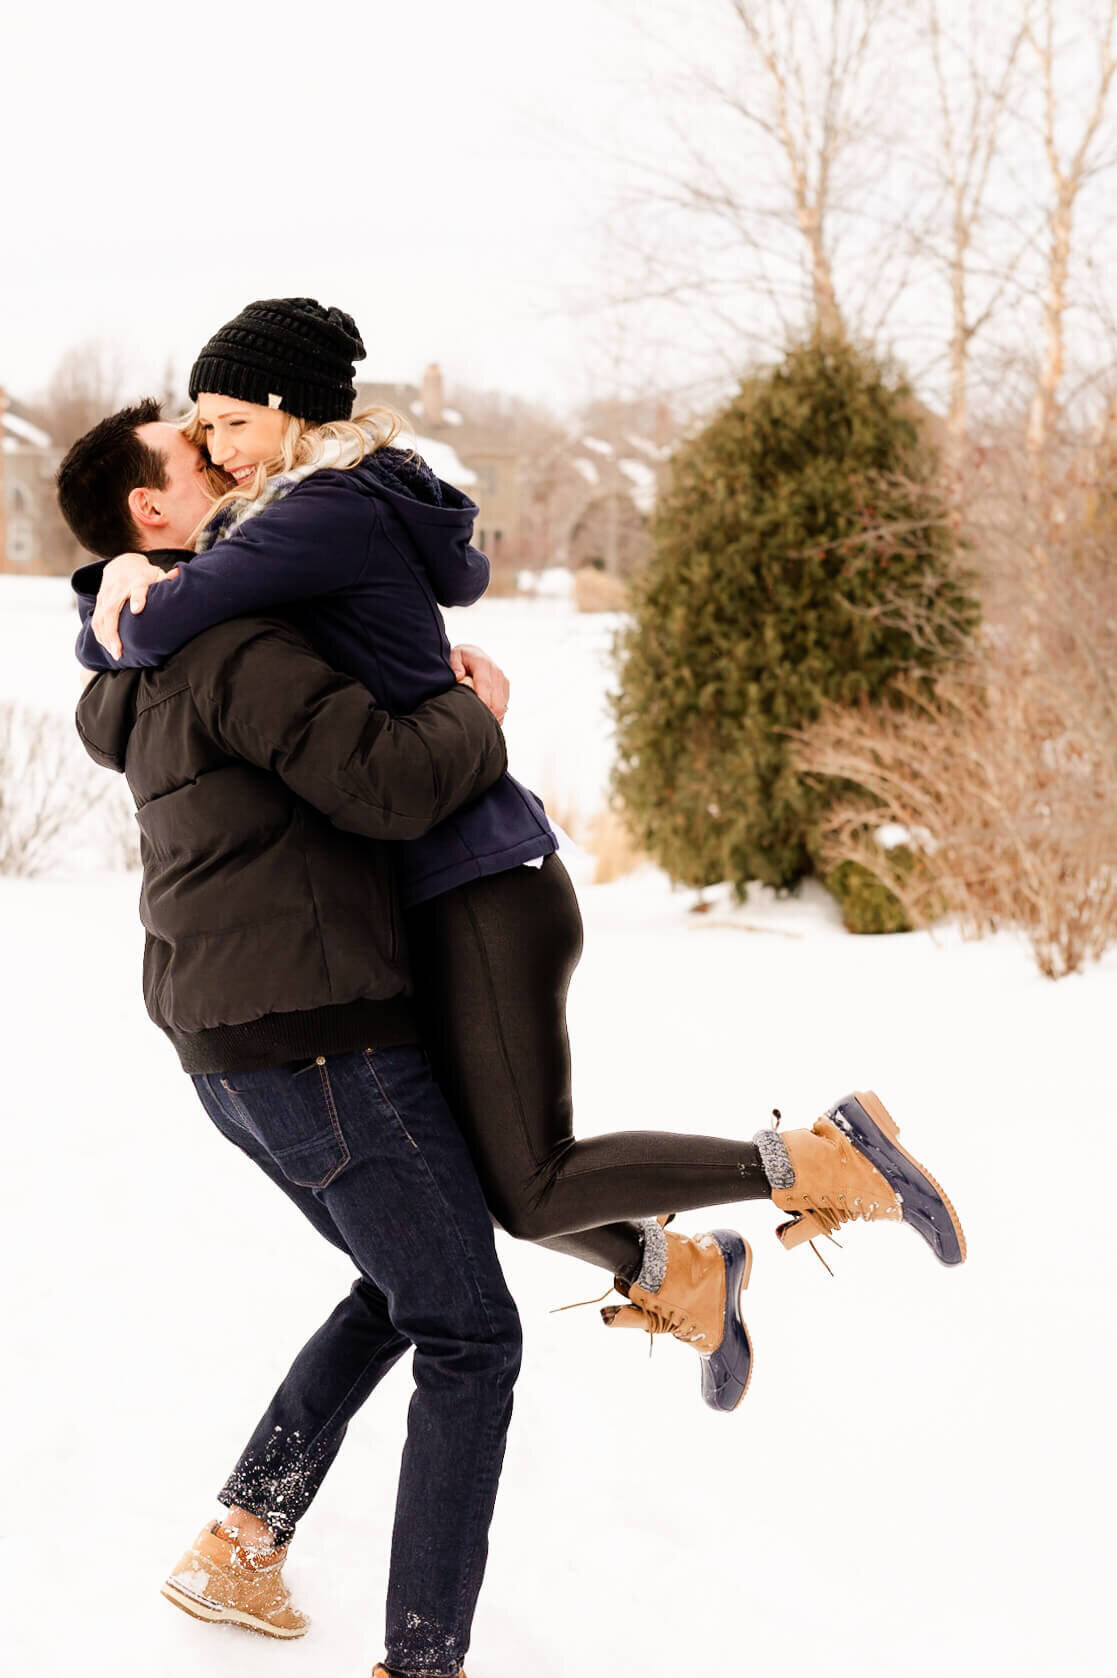 Man and woman playing in the snow during a fun anniversary photo session for couples near Chicago.